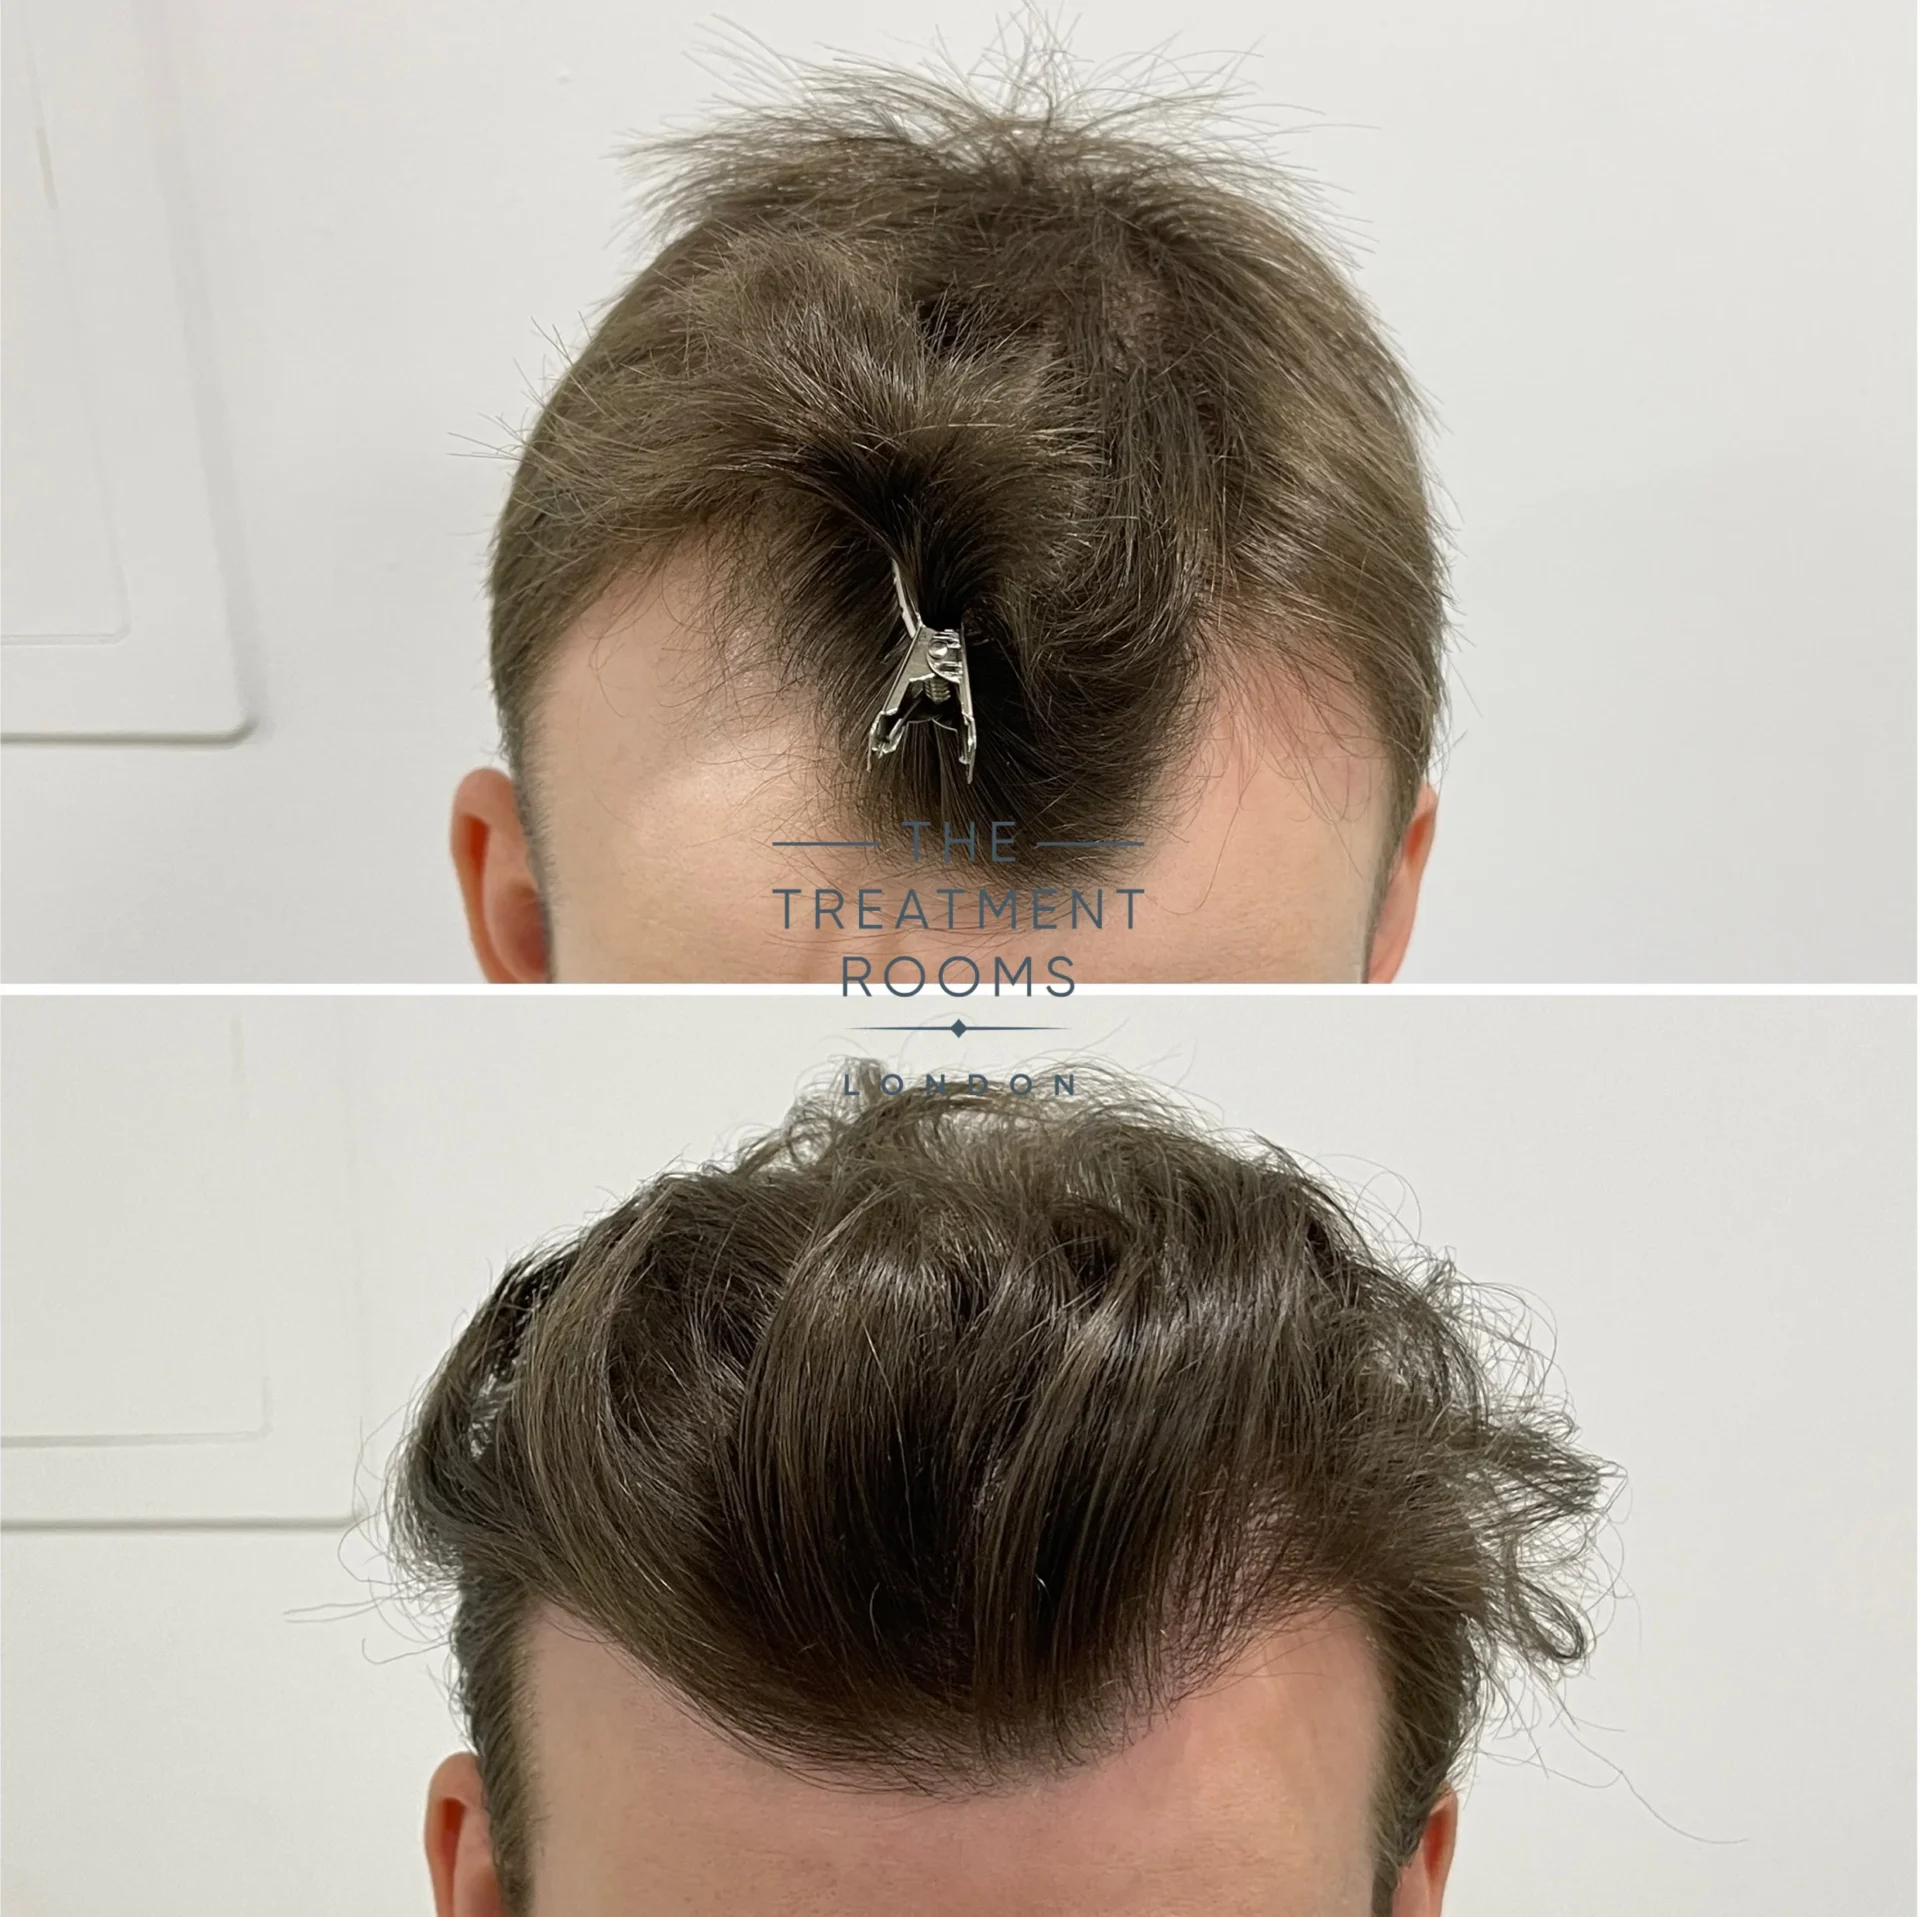 temple hair transplant cost